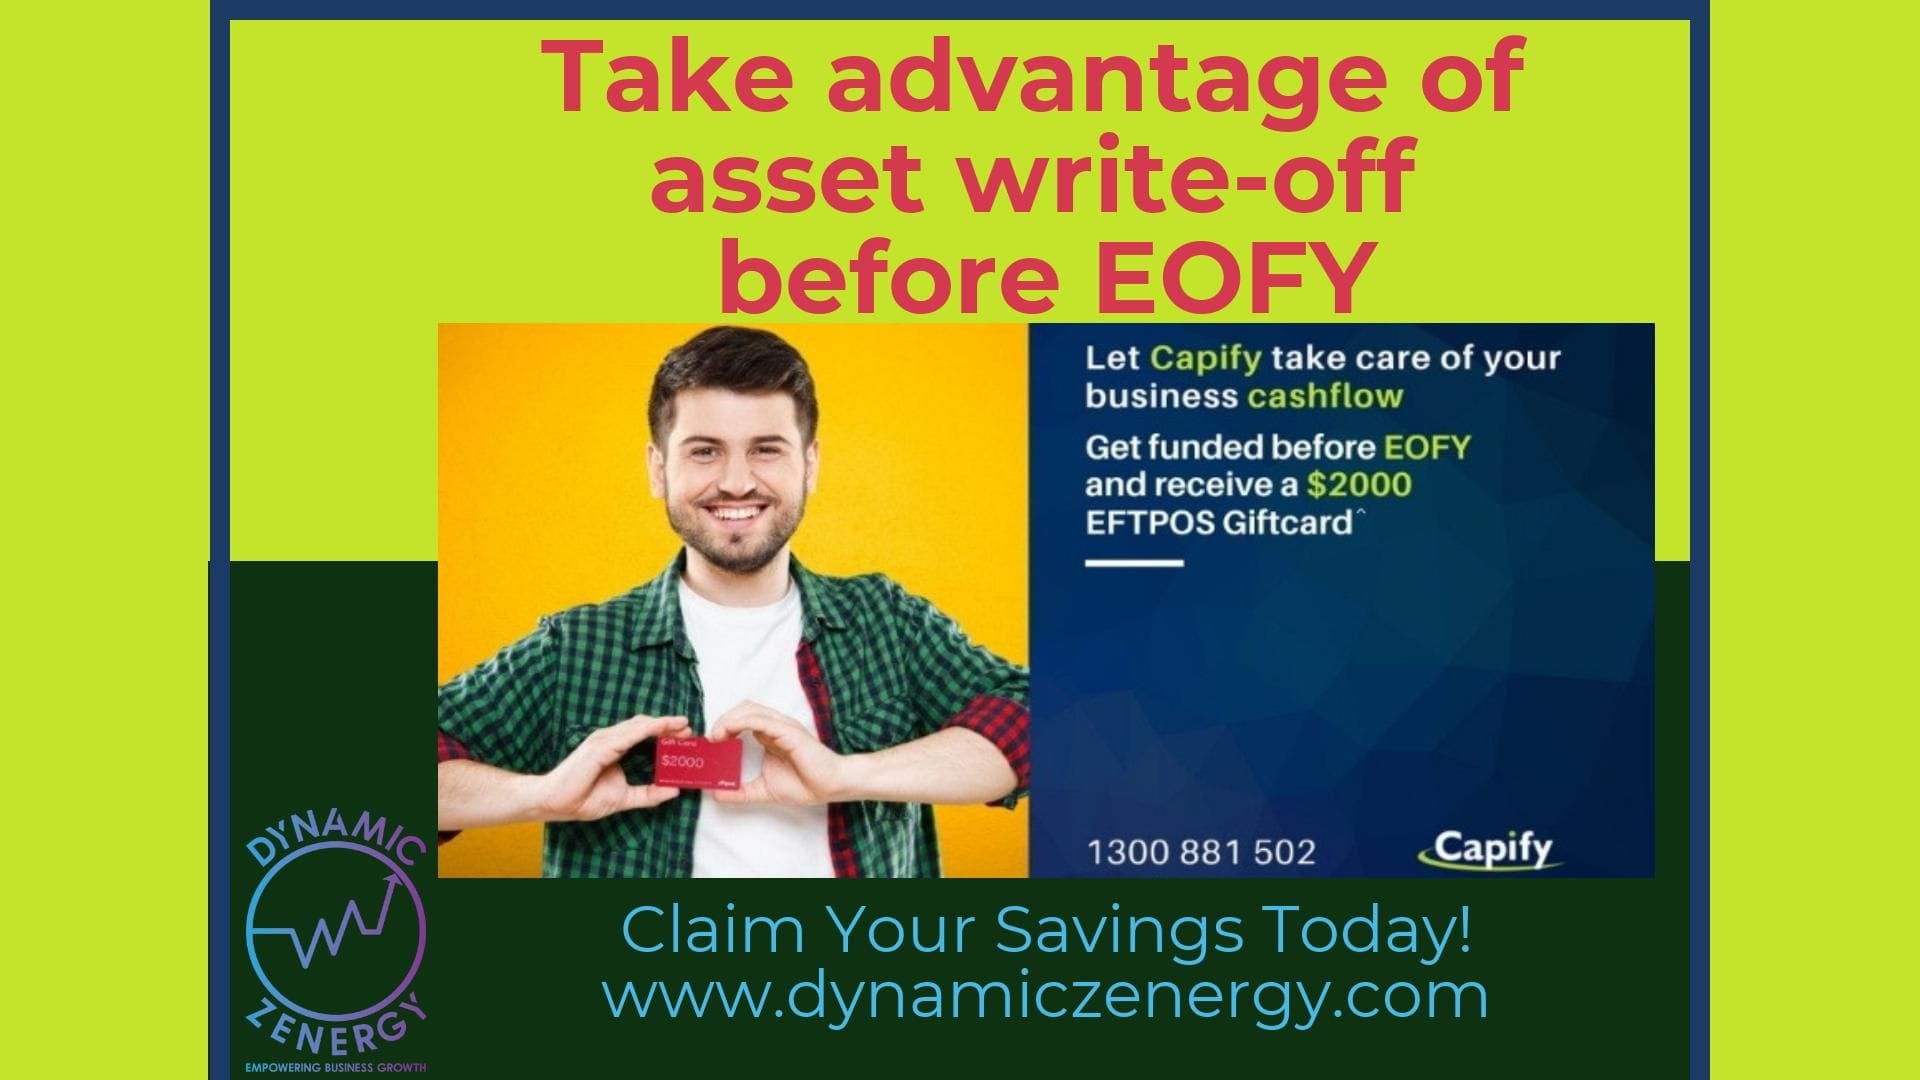 Capify $2000 Cash Back On Business Loans Promo Offer